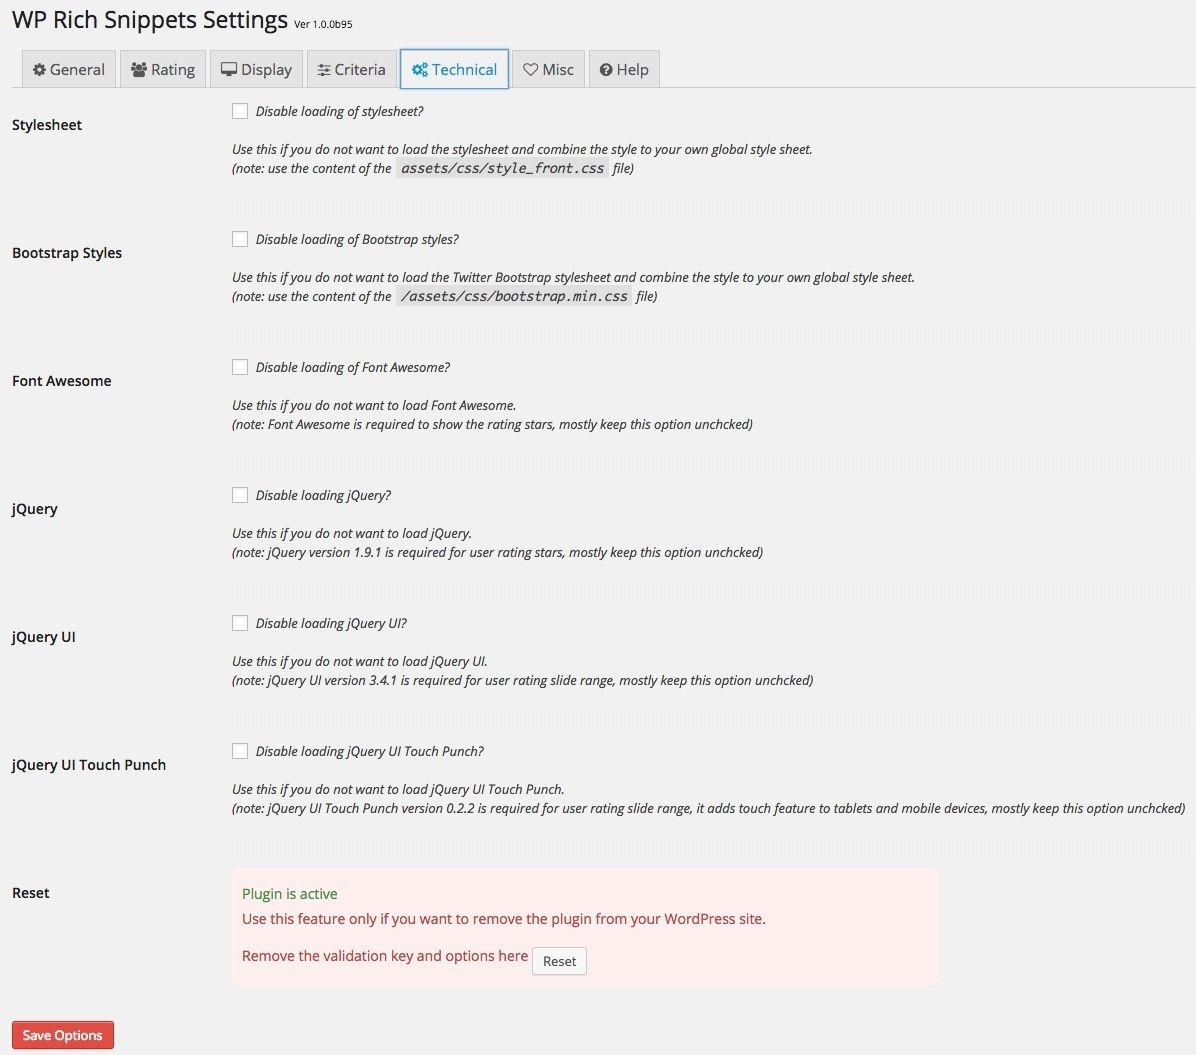 wp-rich-snippets-settings-technical